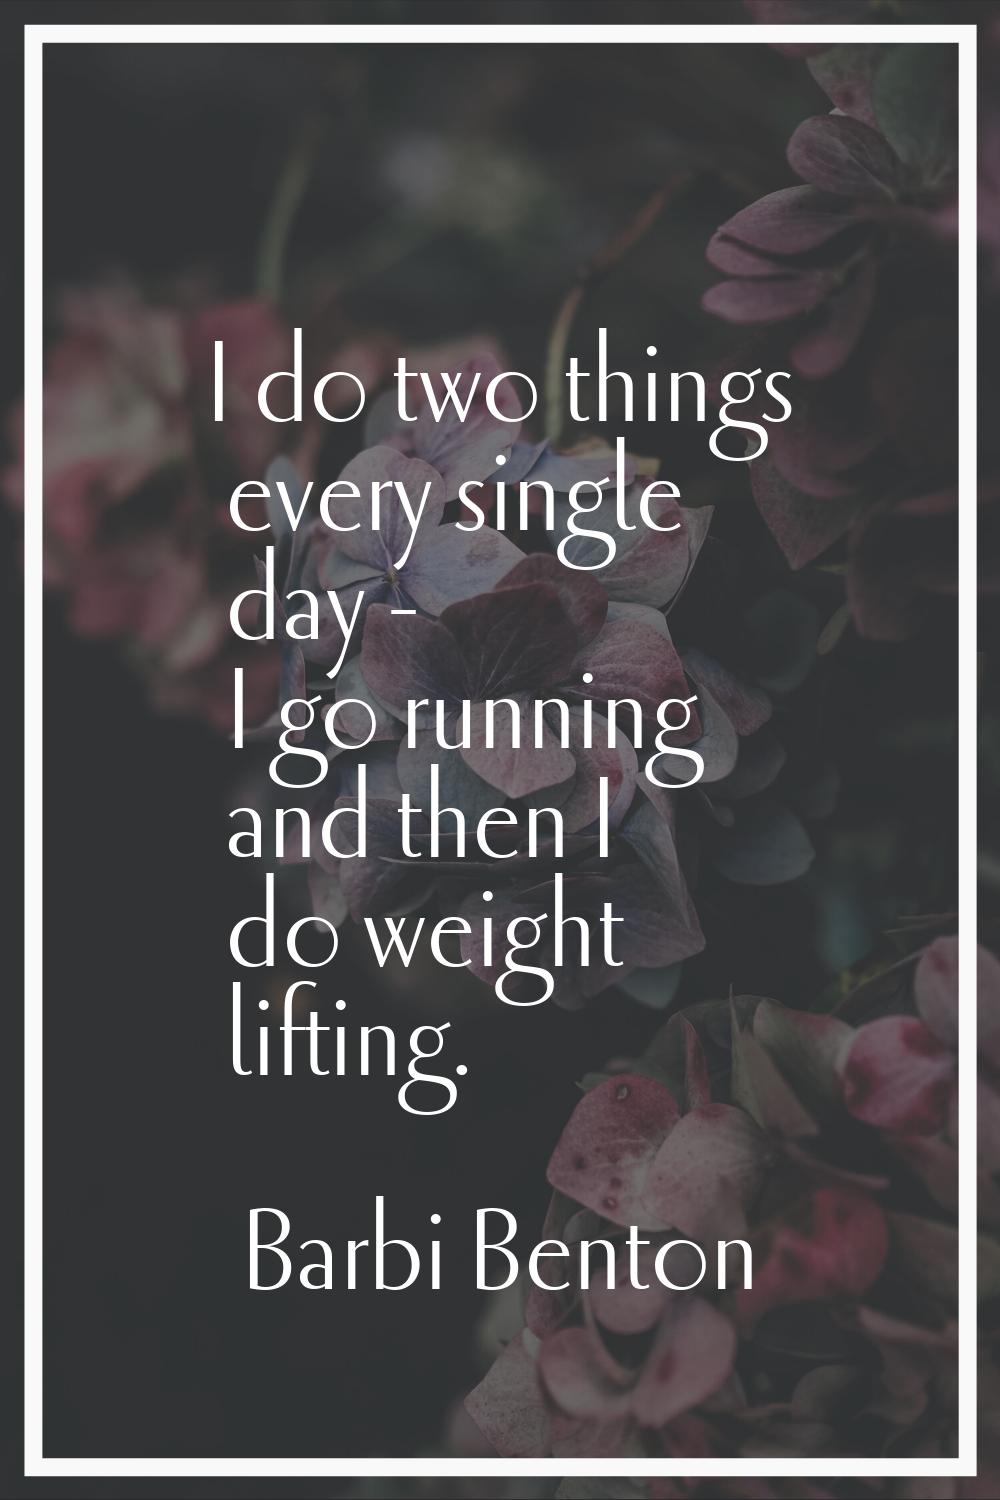 I do two things every single day - I go running and then I do weight lifting.